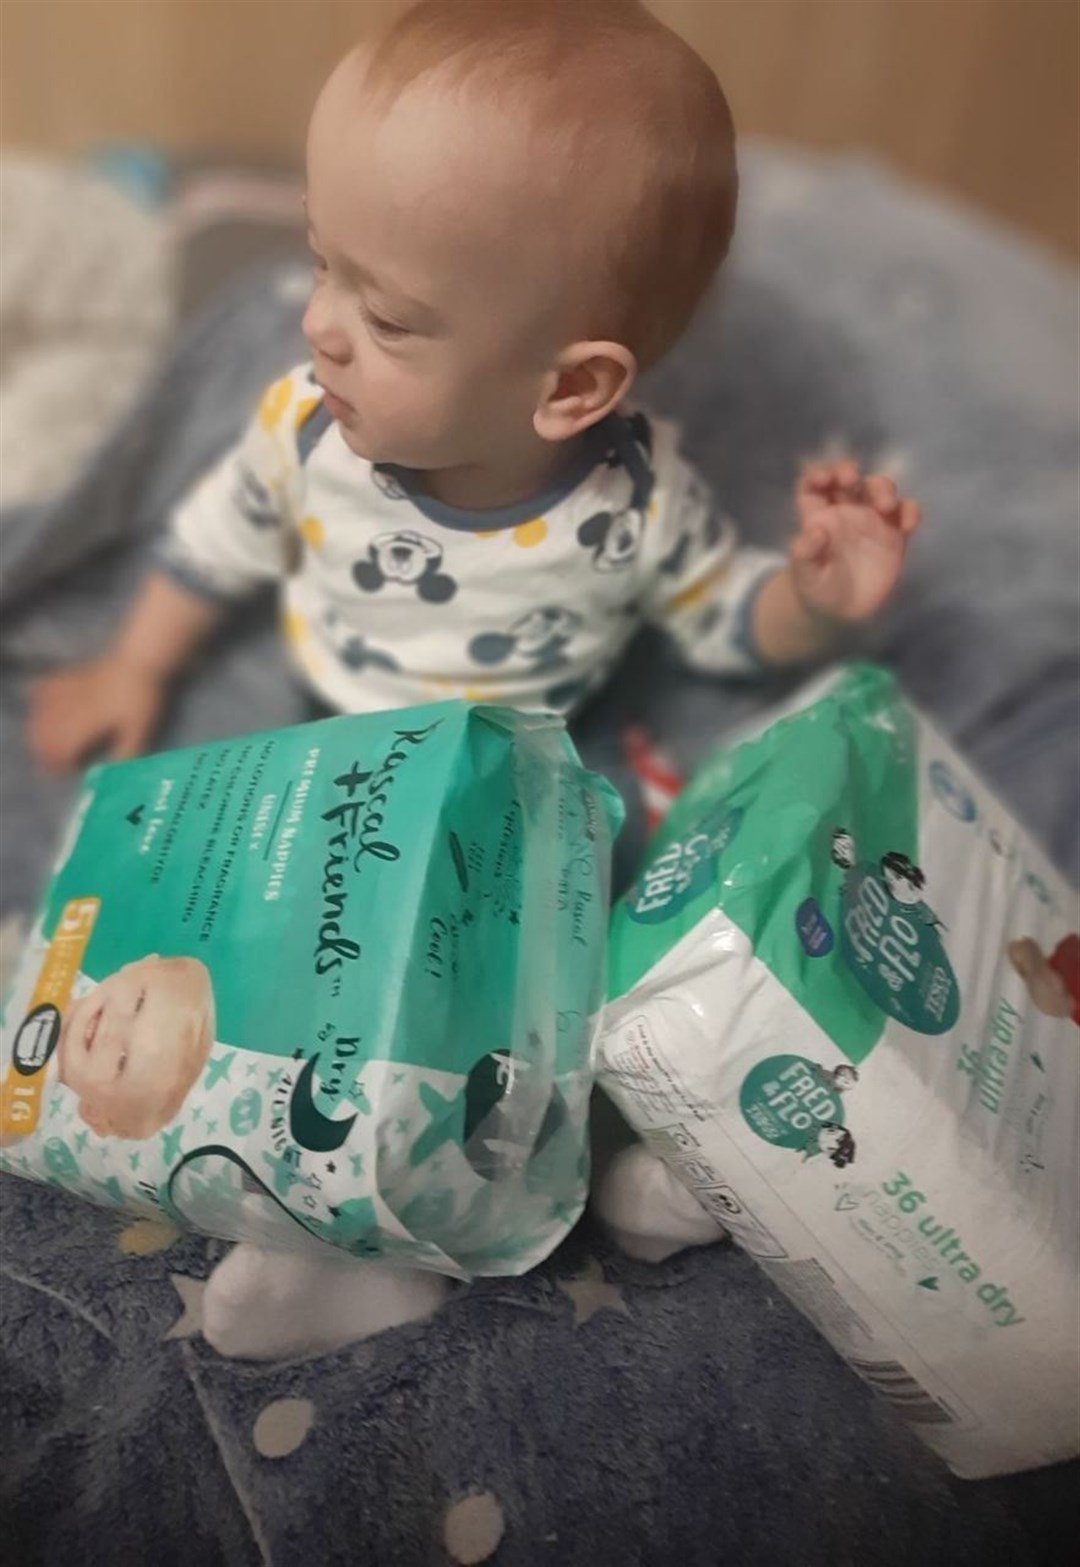 Nappies for Ukraine’s youngest are on the wish list.